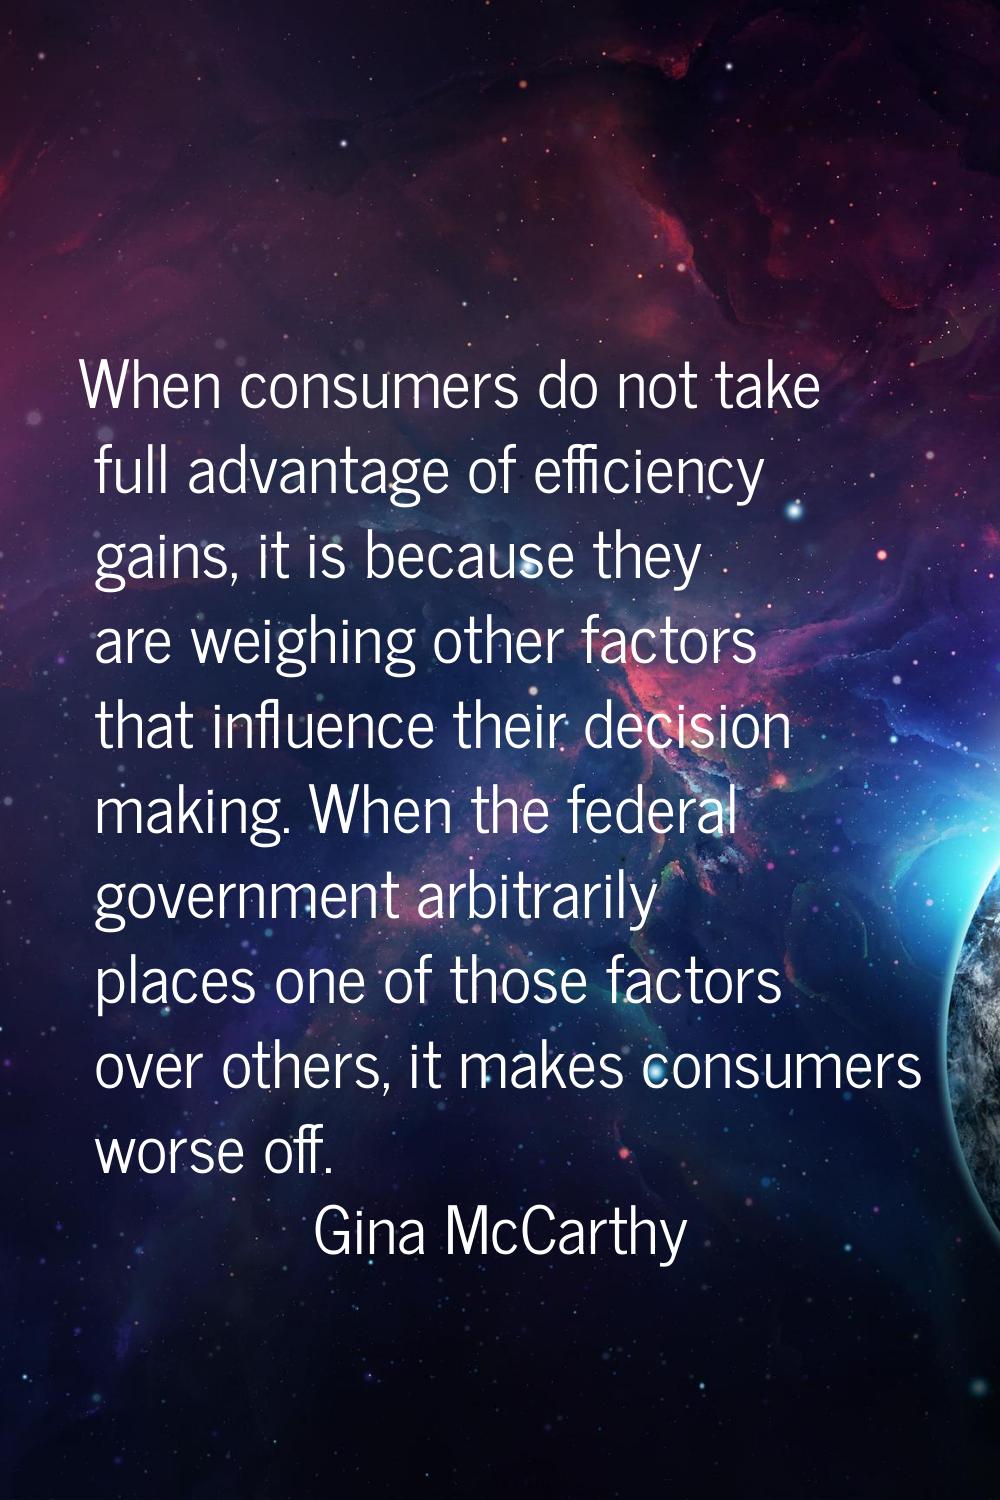 When consumers do not take full advantage of efficiency gains, it is because they are weighing othe